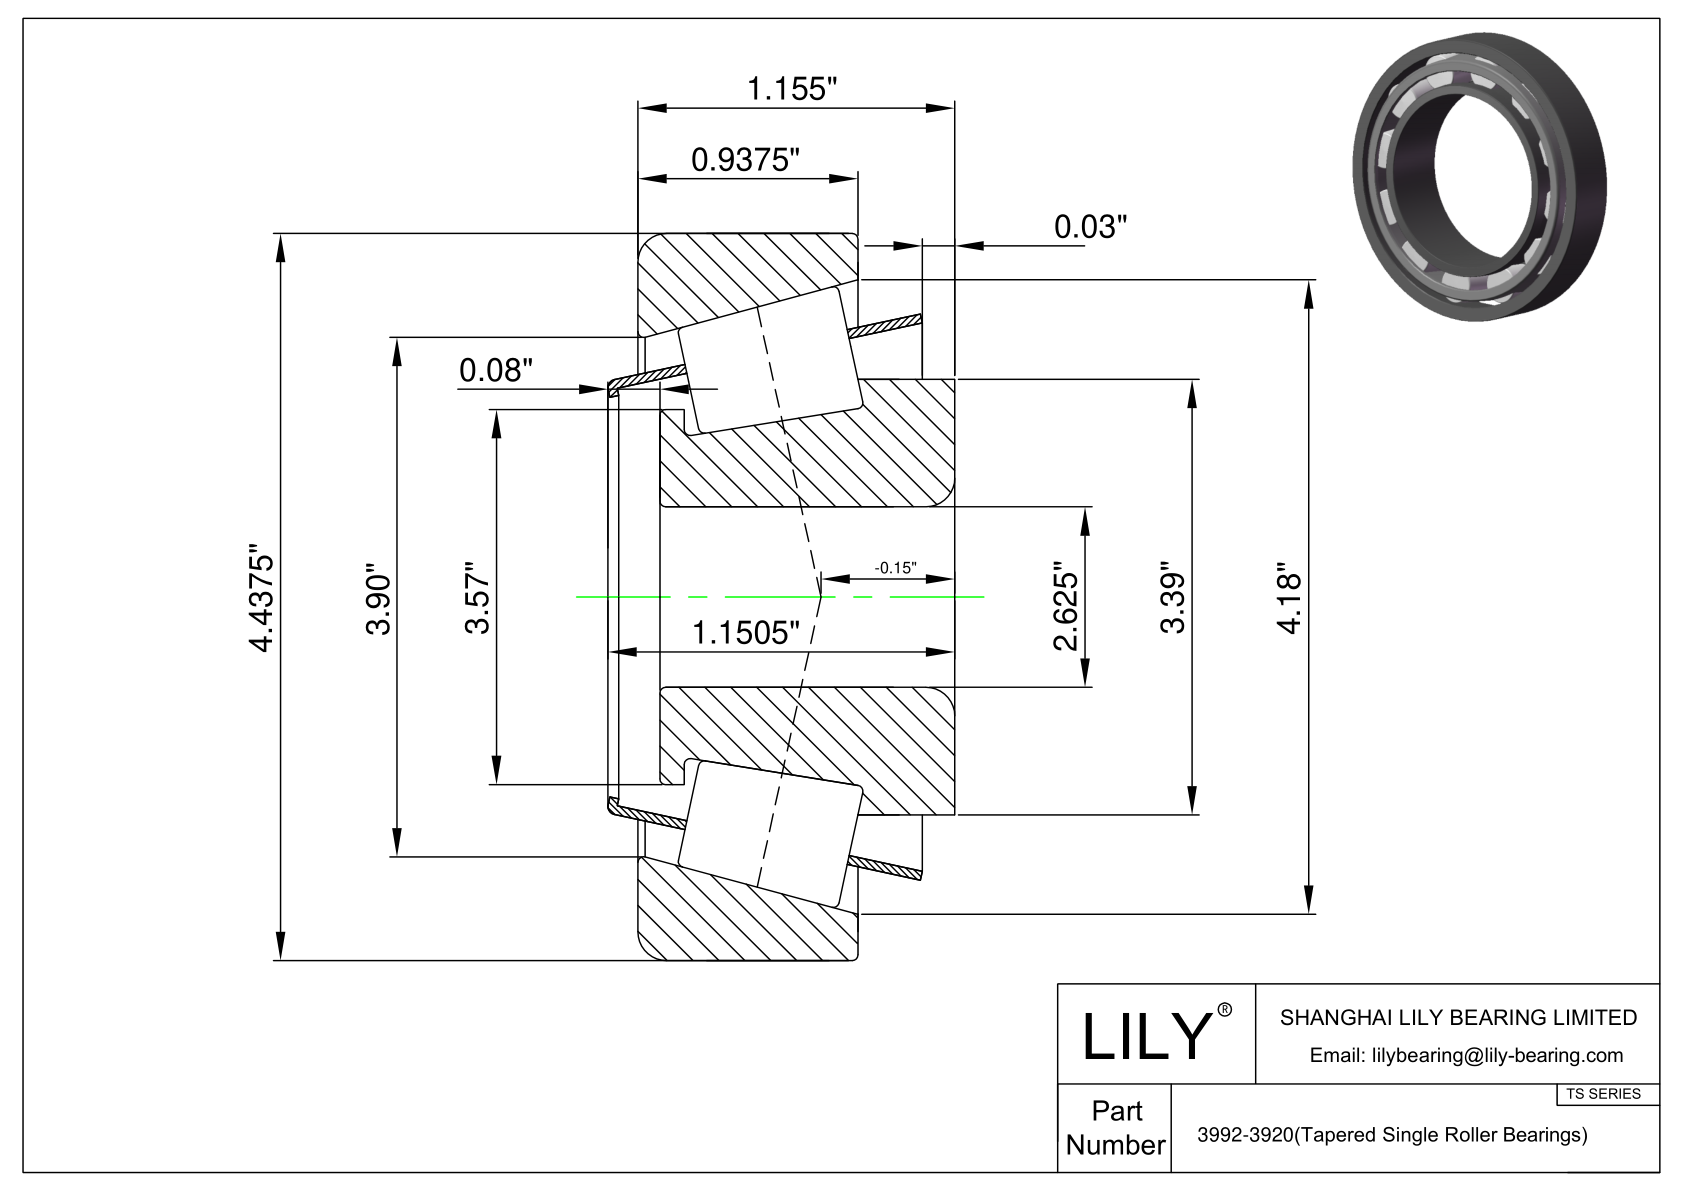 3992-3920 TS (Tapered Single Roller Bearings) (Imperial) cad drawing